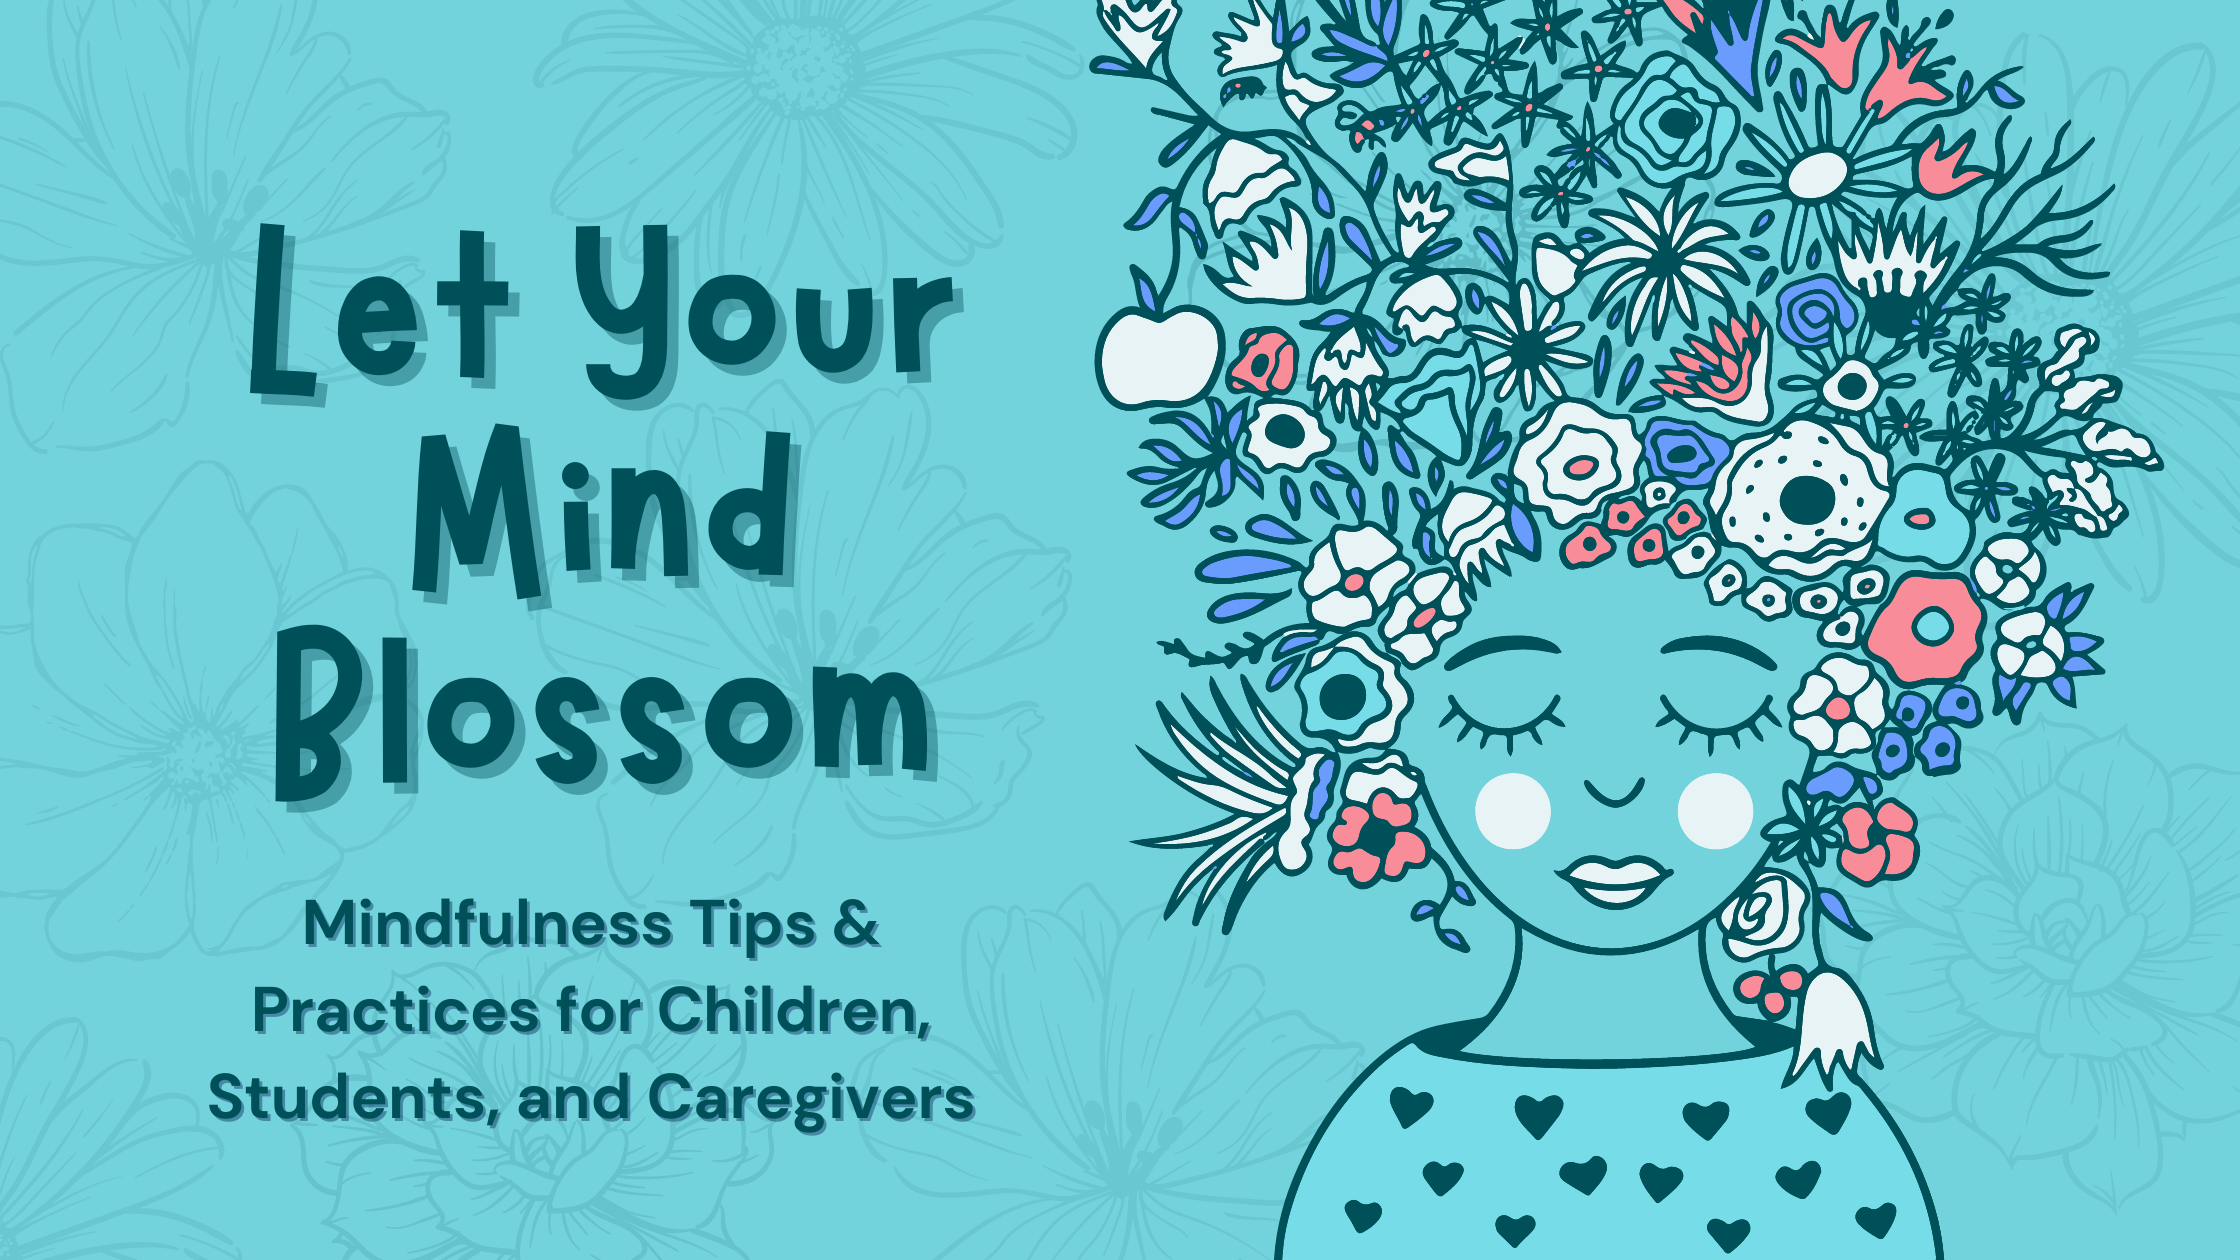 Mindfulness Tips & Practices for Children, Students, and Caregivers